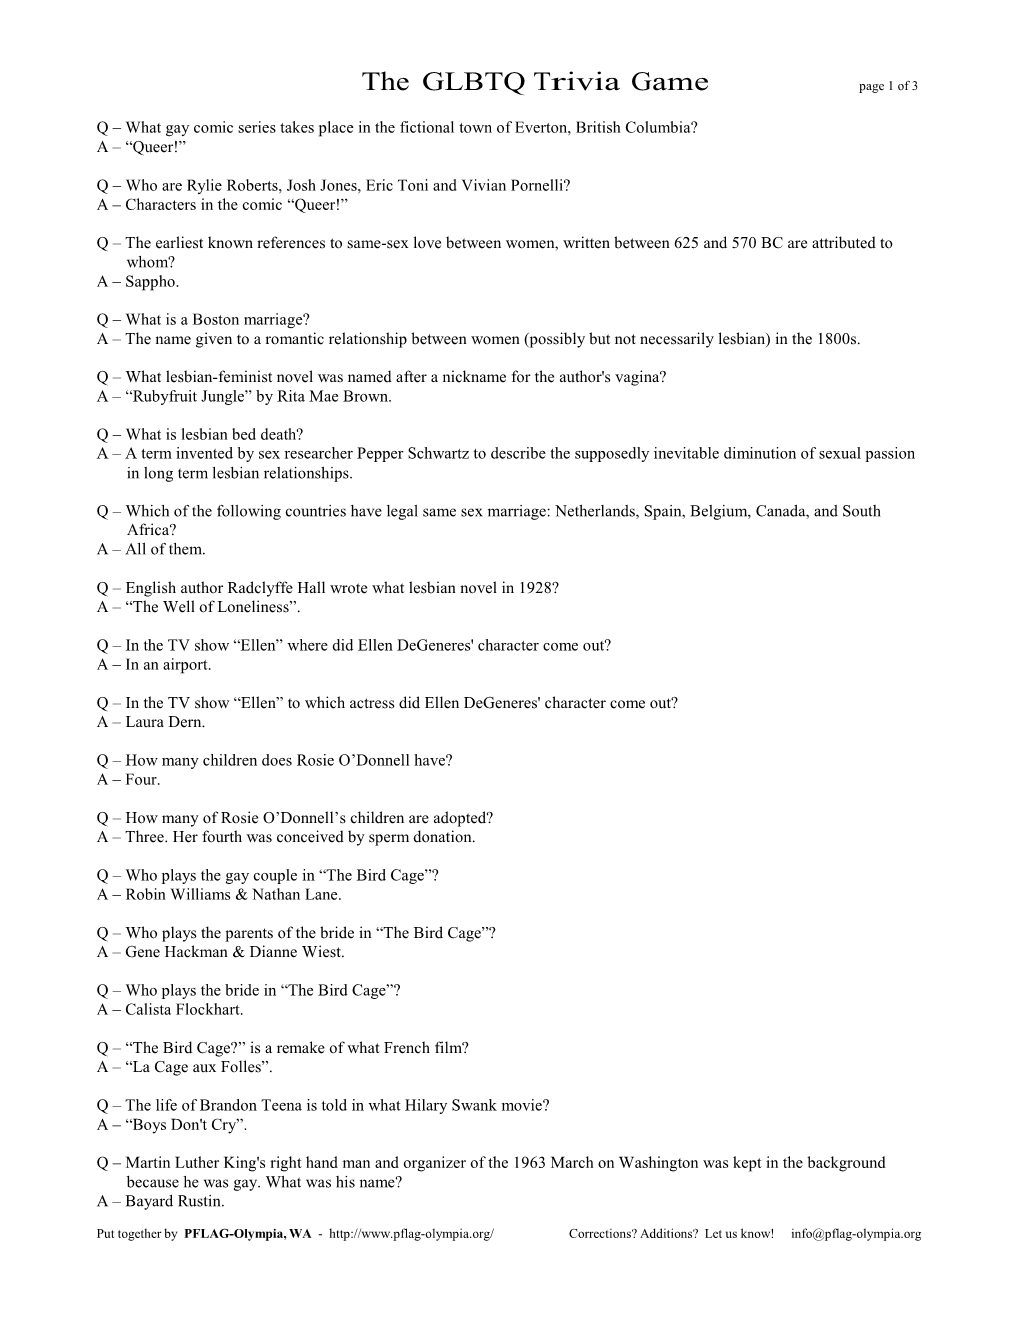 The GLBTQ Trivia Game Page 1 of 3